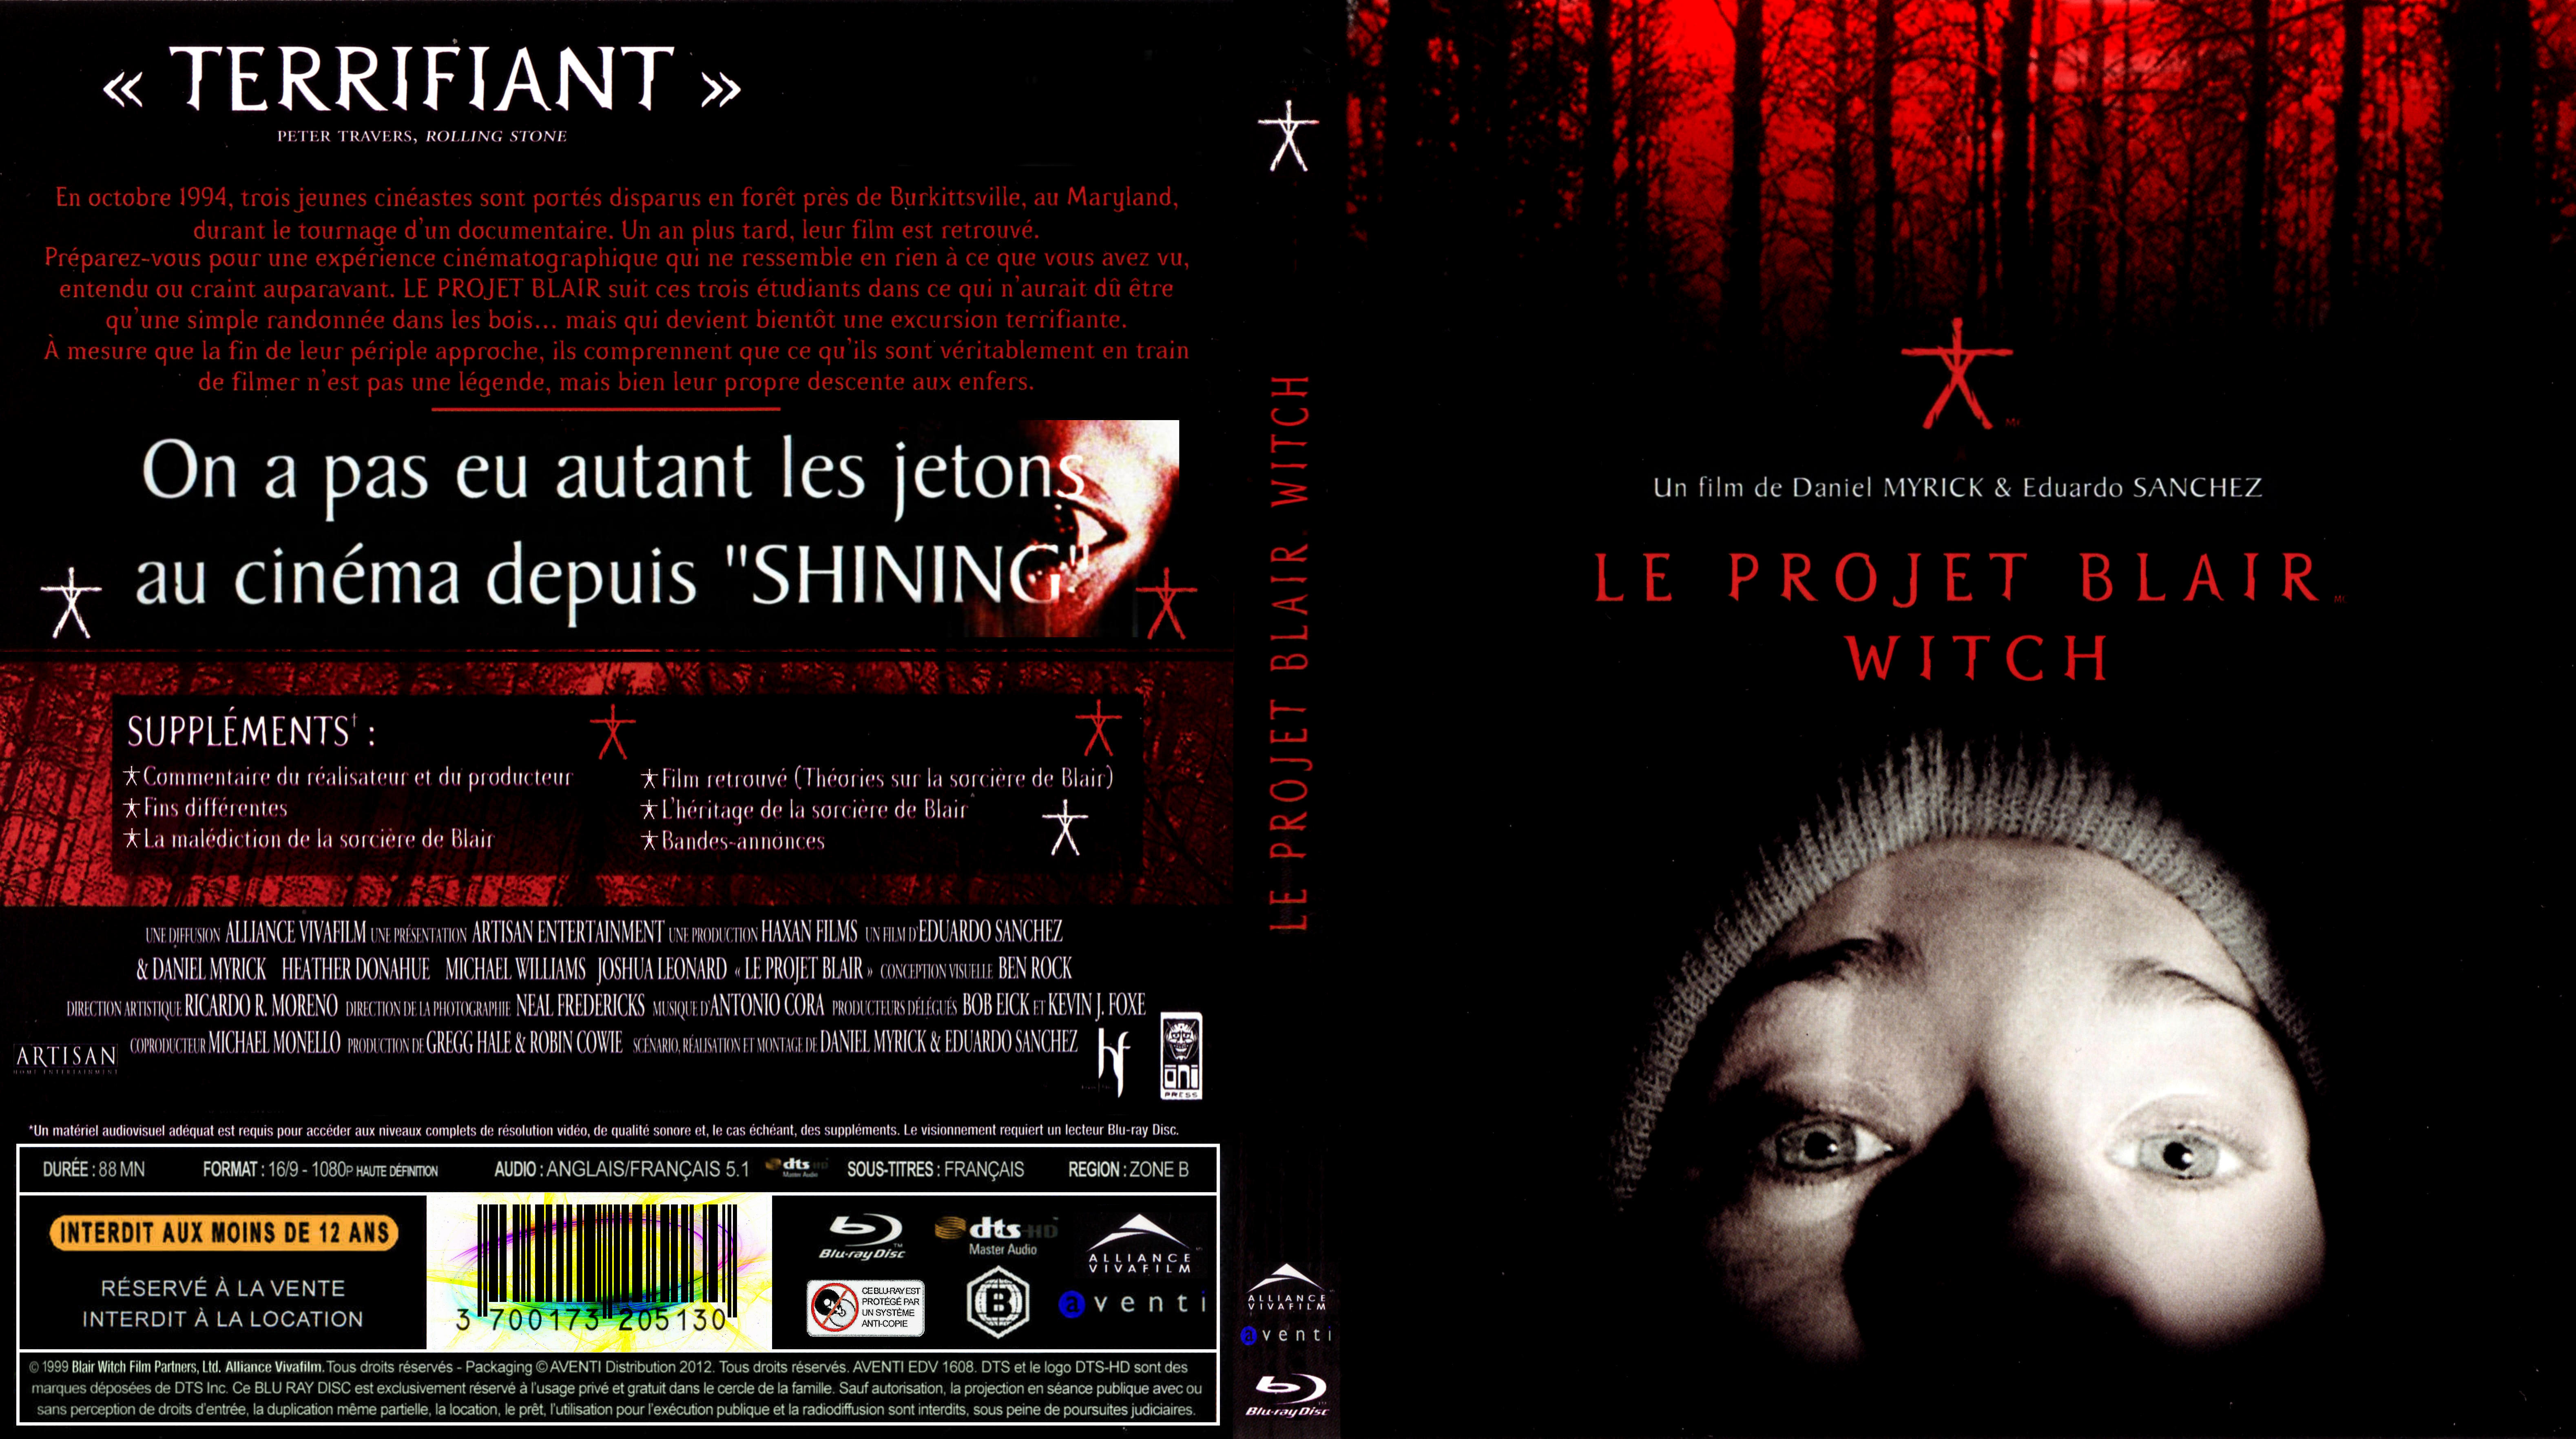 Jaquette DVD Le projet blair witch custom (BLU-RAY)